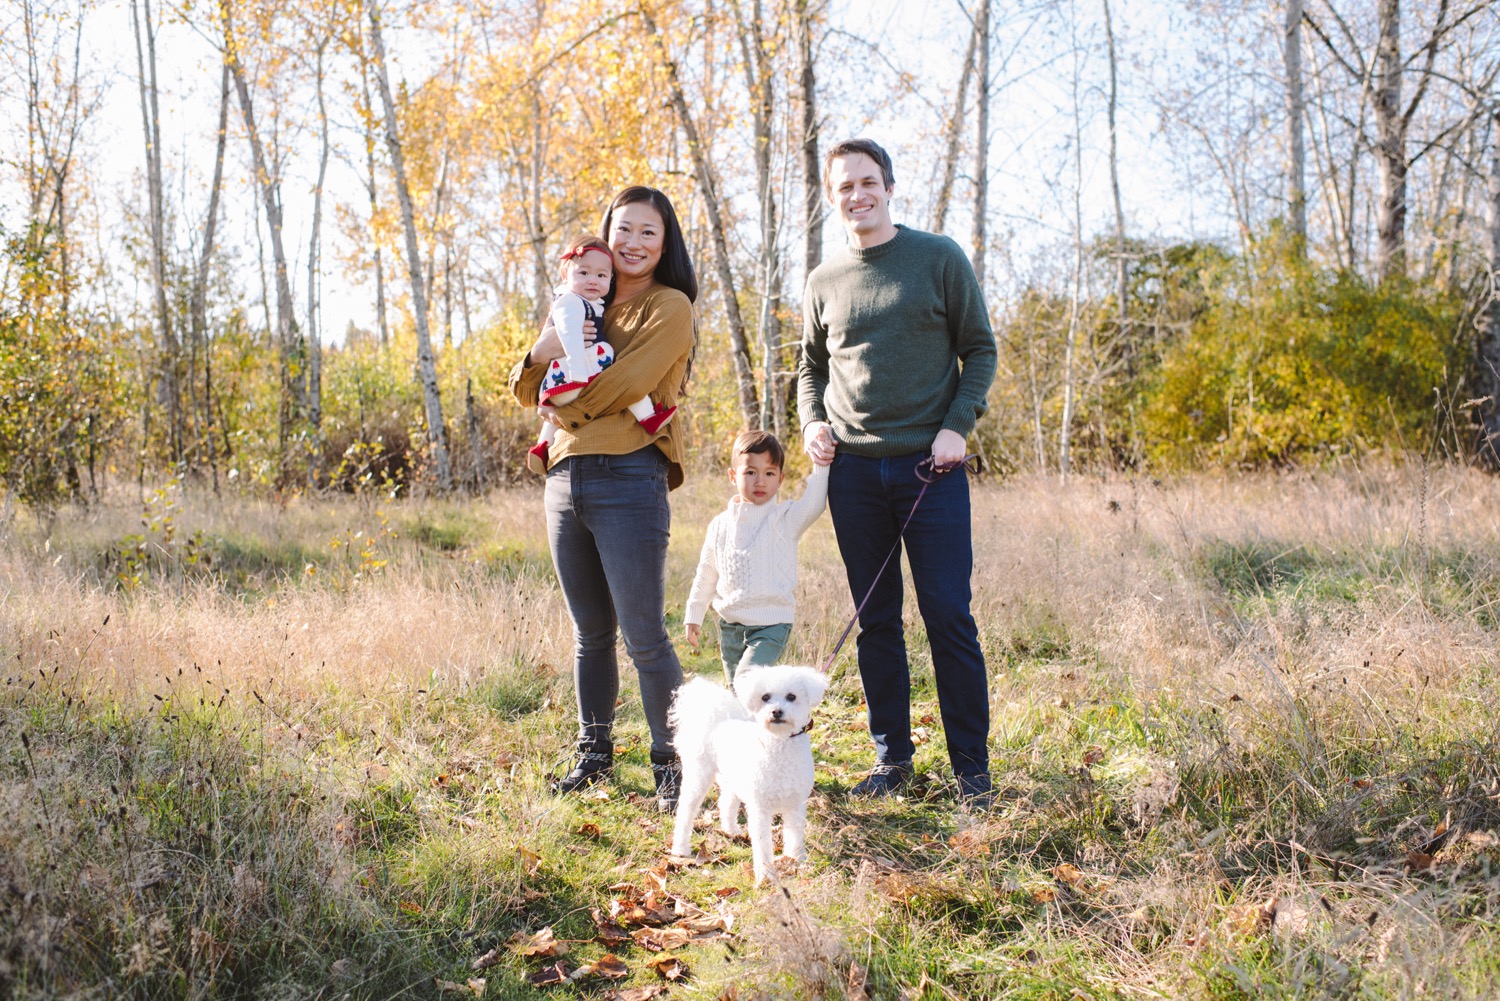 Outdoor family portraits poses Stock Photos - Page 1 : Masterfile